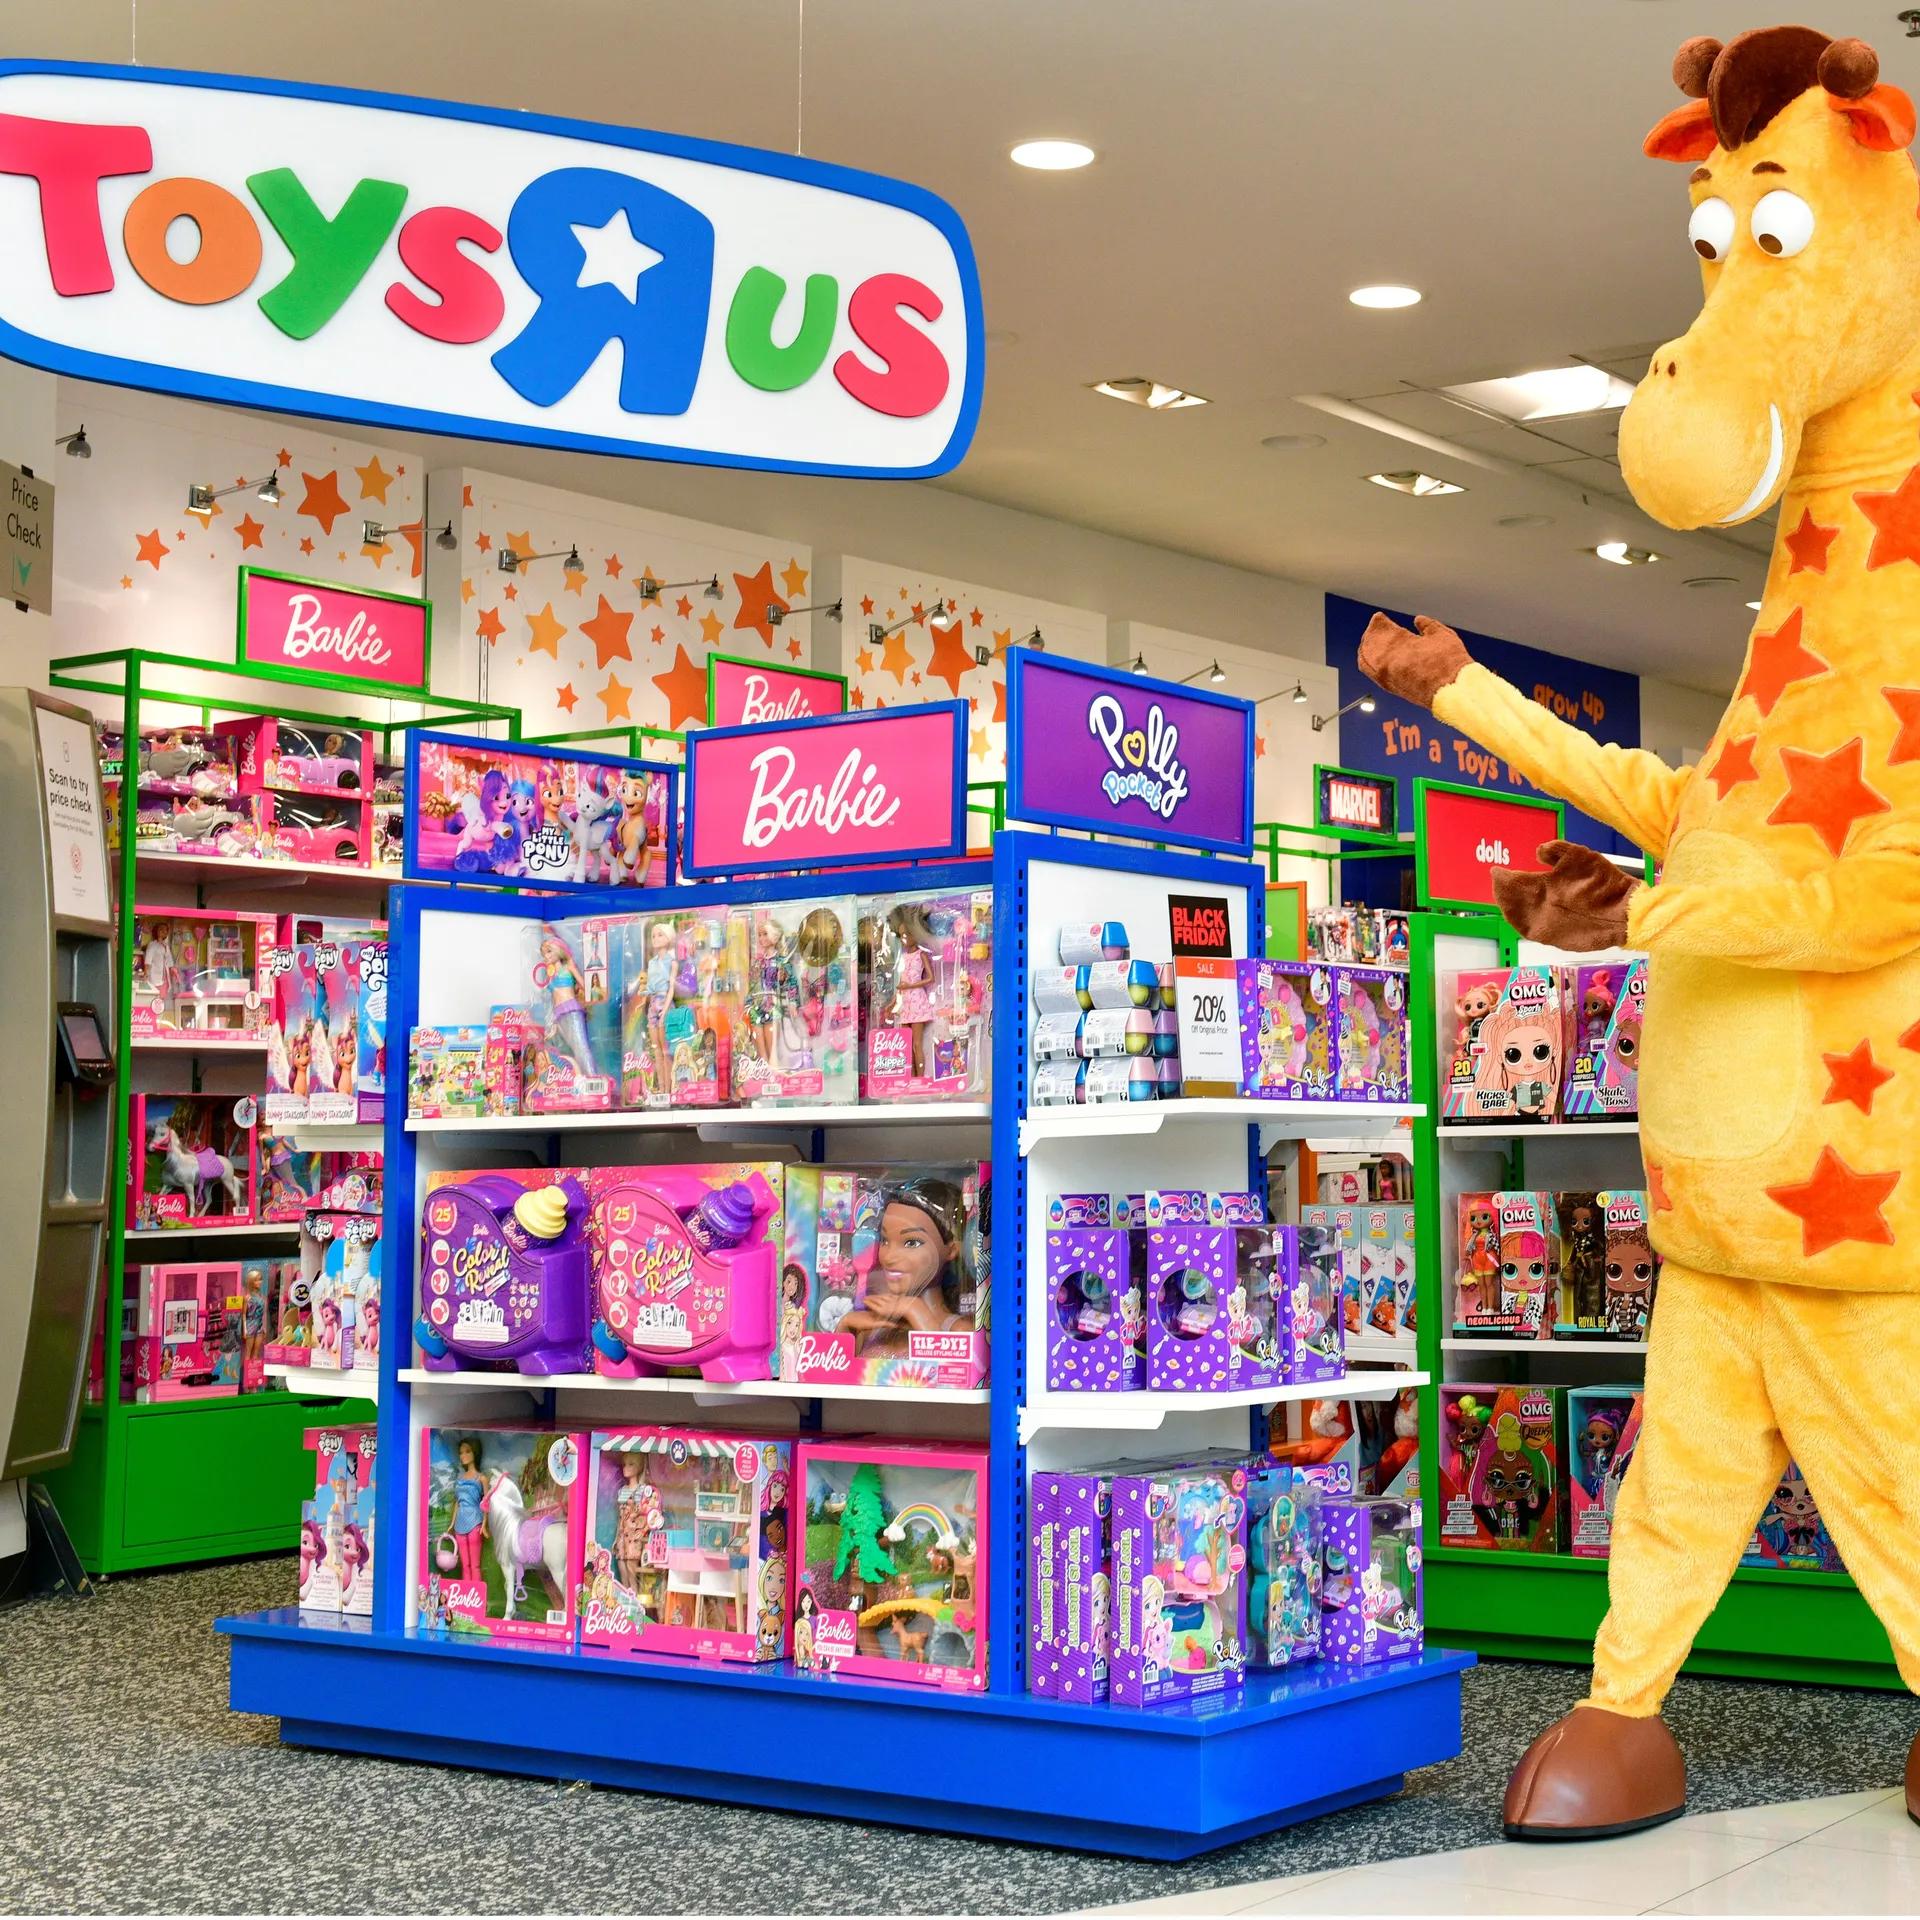 Toys R Us: Get 10% Off Coupon